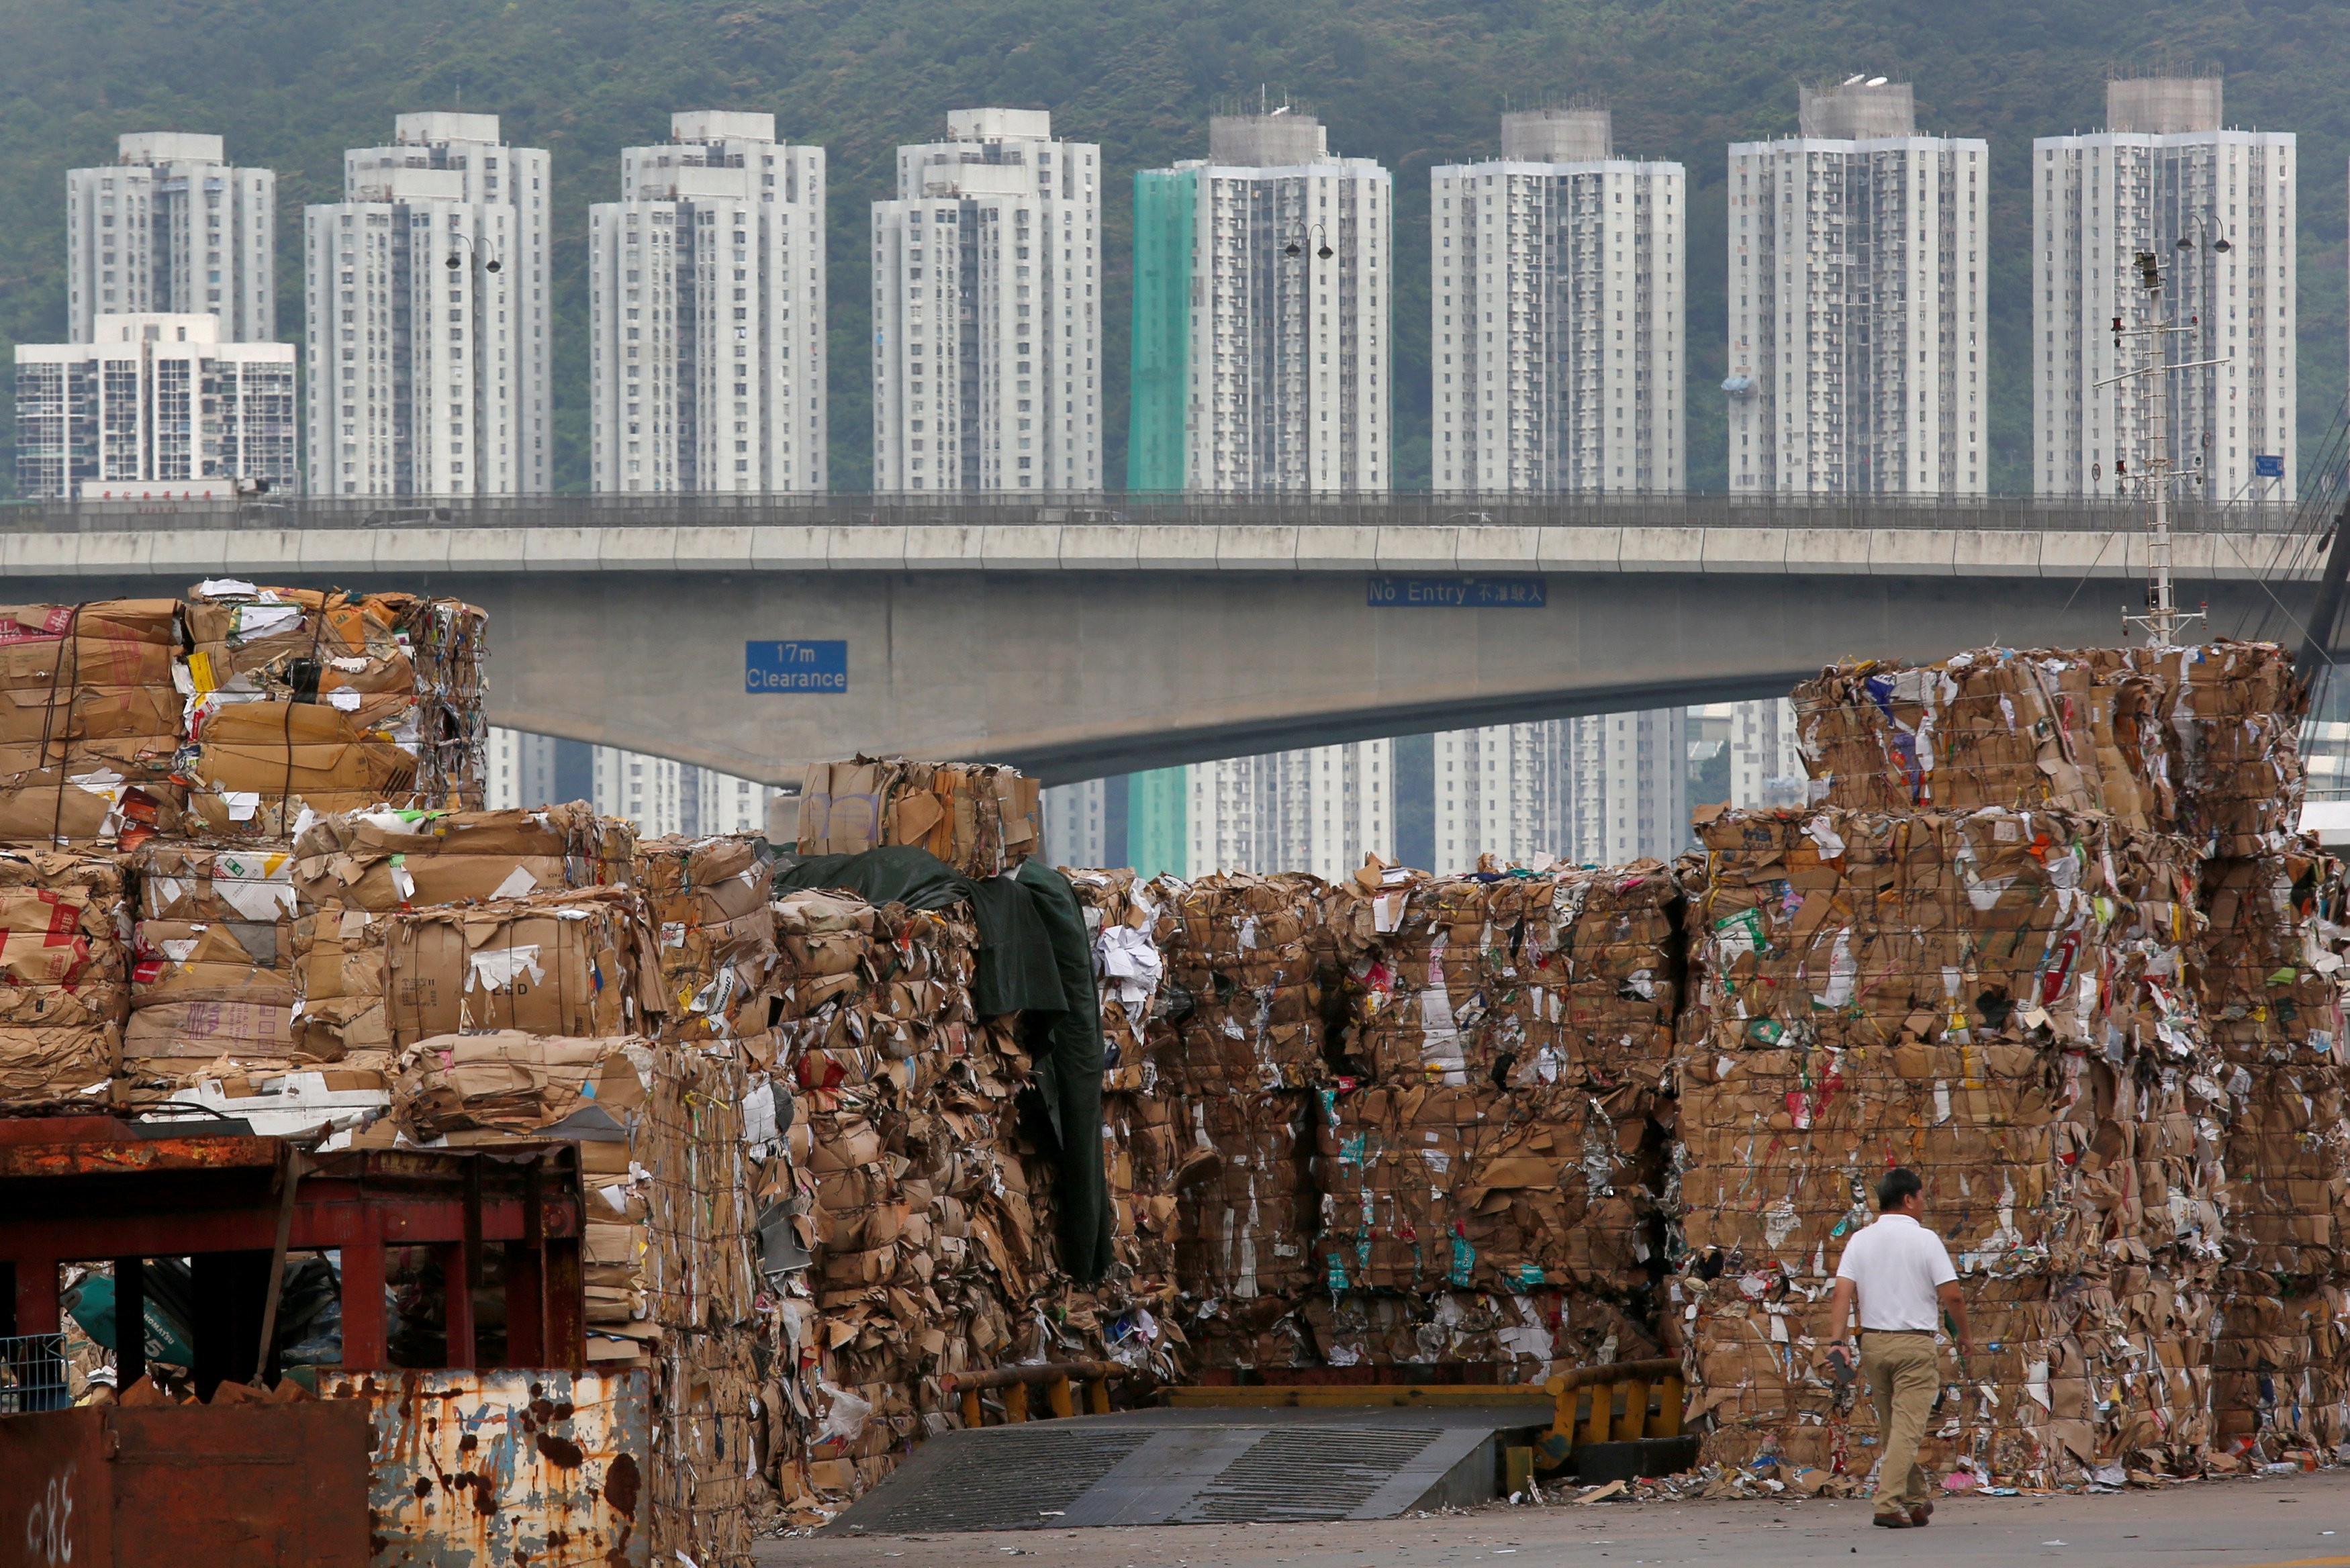 Tonnes of waste paper to be shipped to mainland China is piled up at a dock in Hong Kong, on September 15, after stricter requirements for waste imports into the mainland were announced. Photo: Reuters